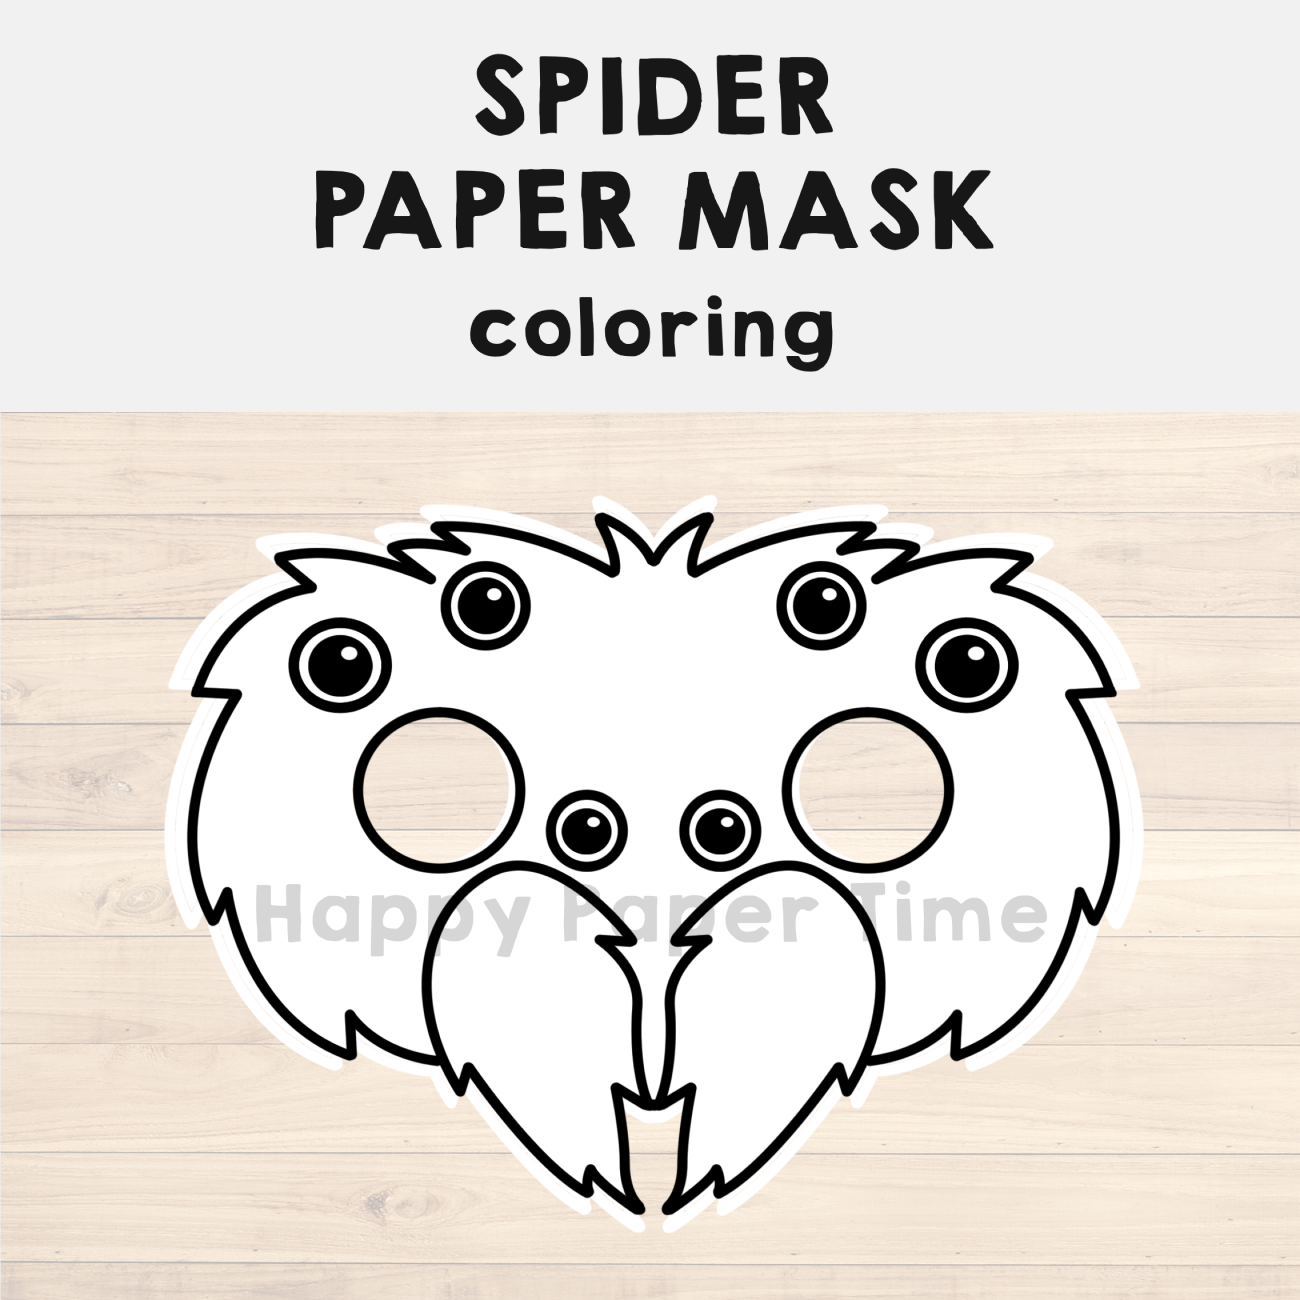 Spider paper mask printable coloring halloween craft activity template made by teachers